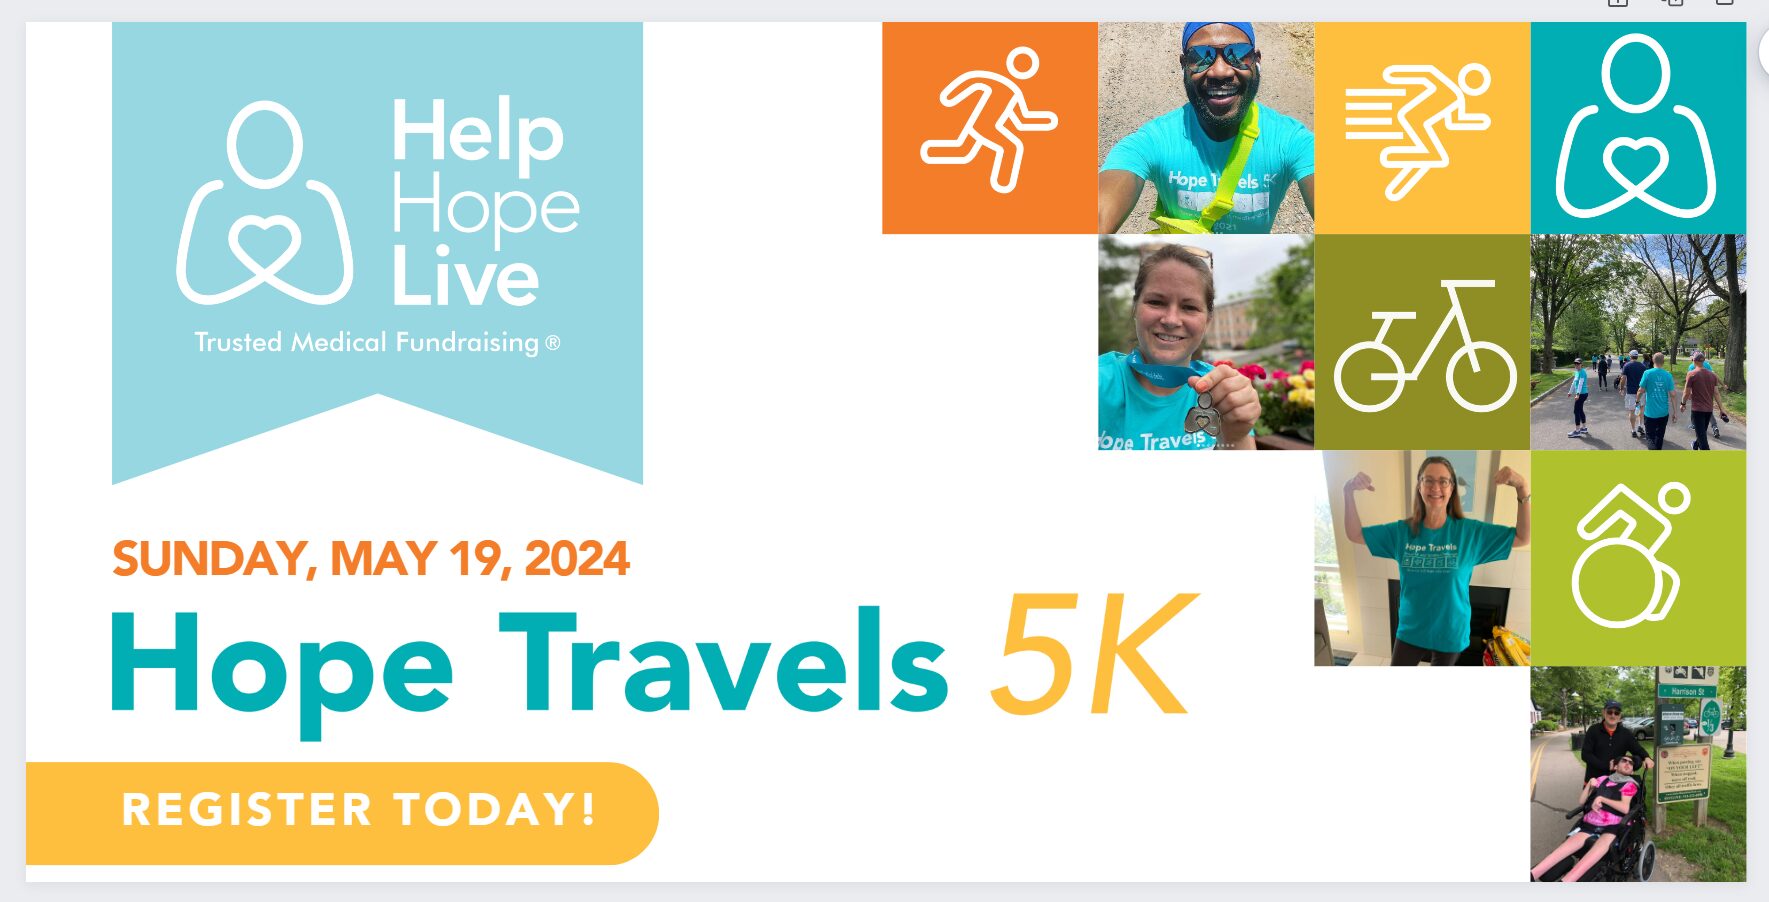 A graphic reads Hope Travels 5K Register Today! Sunday, May 19, 2024. With the Help Hope Live logo and tagline Trusted Medical Fundraising, and a collage of participants in the 2023 Hope Travels event wearing teal event t-shirts. They have different ethnicities, ages, genders, and mobility devices.